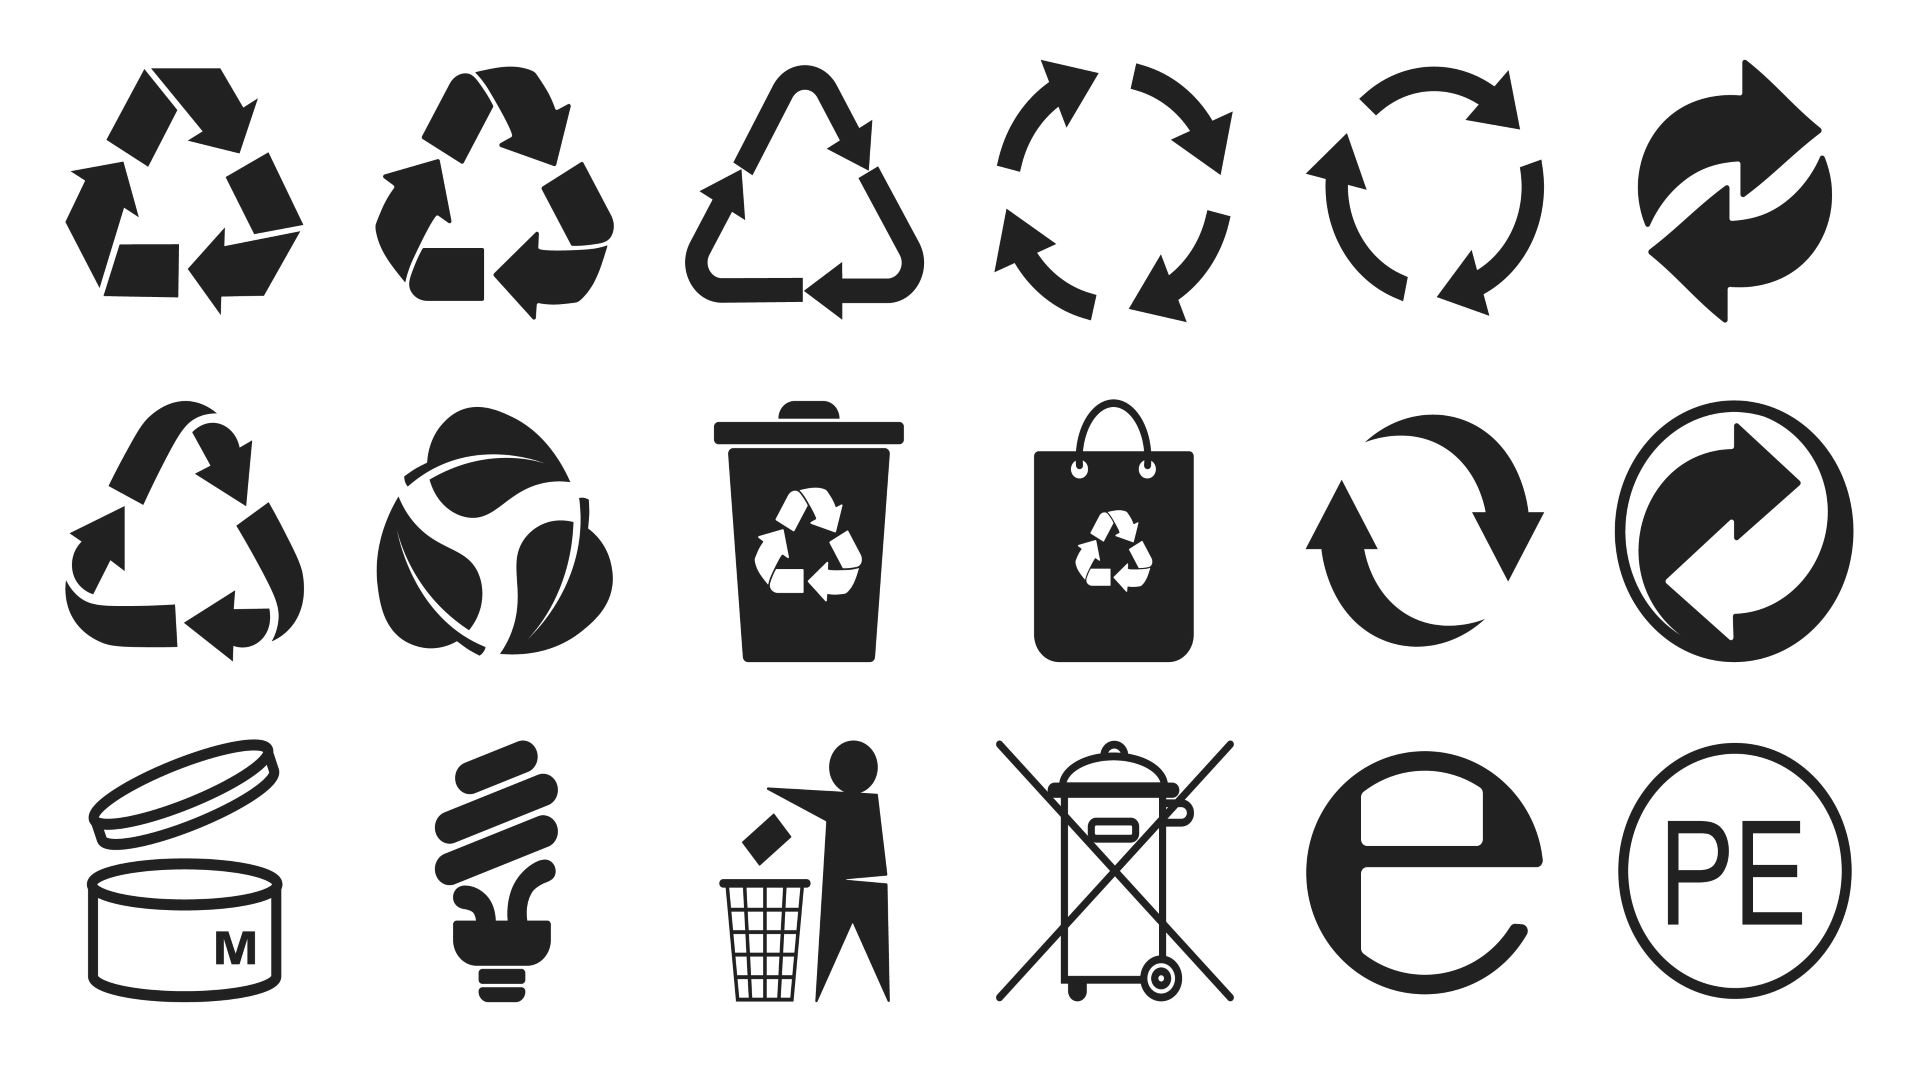 Is it time for “a revolution” in packaging symbols?